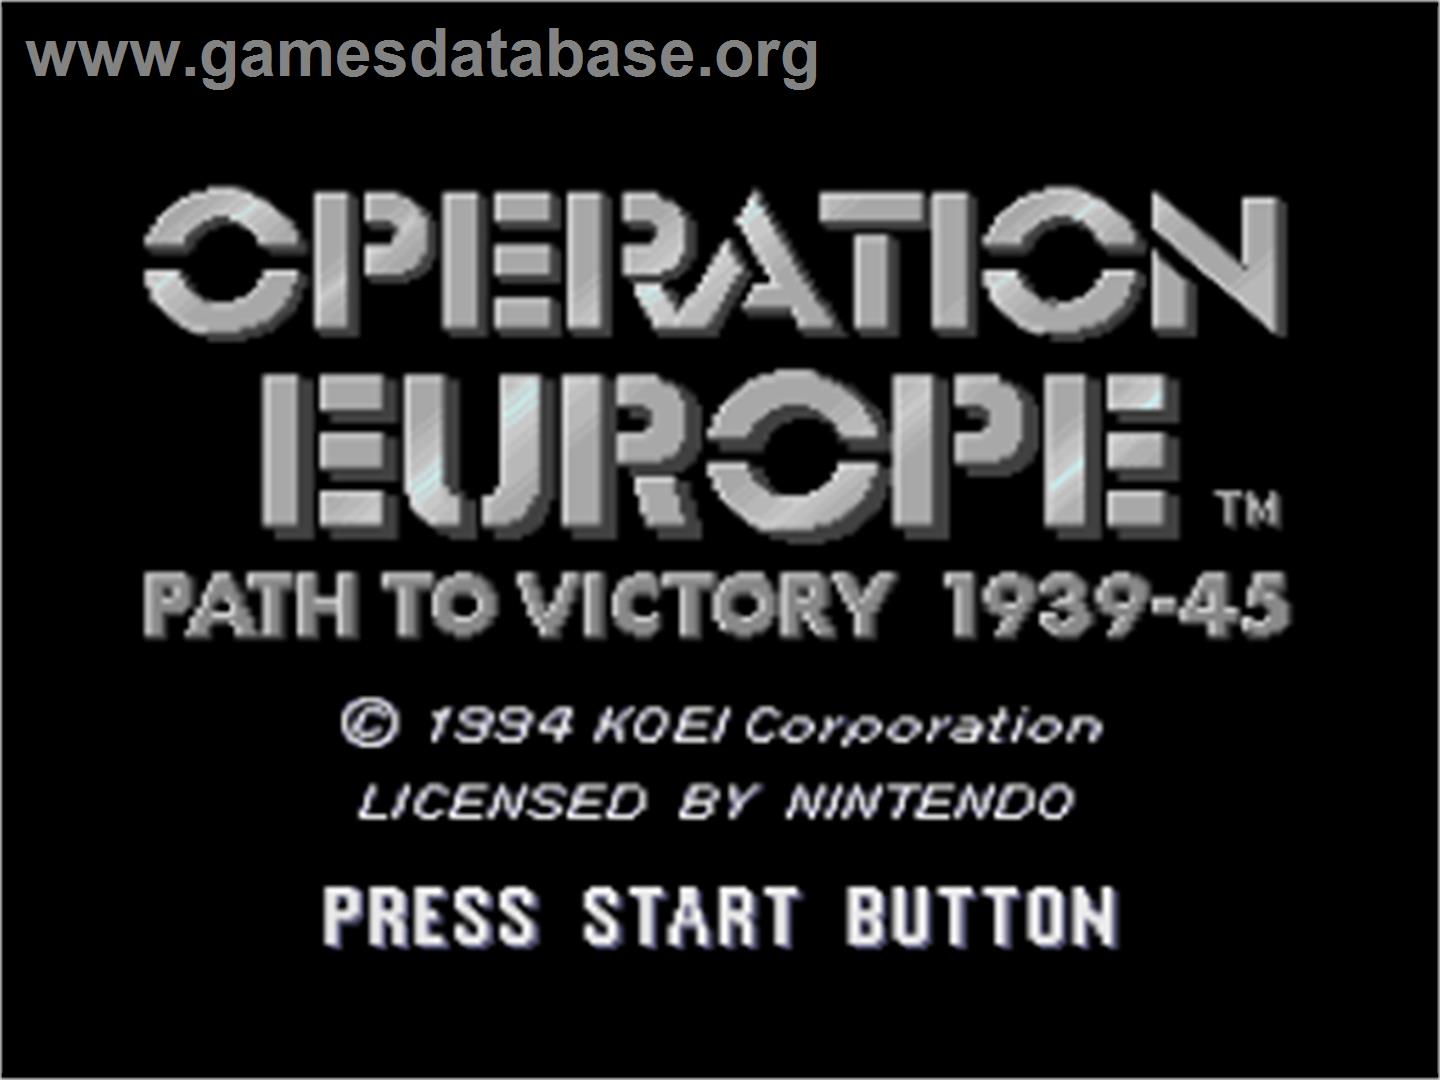 Operation Europe: Path to Victory 1939-45 - Nintendo SNES - Artwork - Title Screen